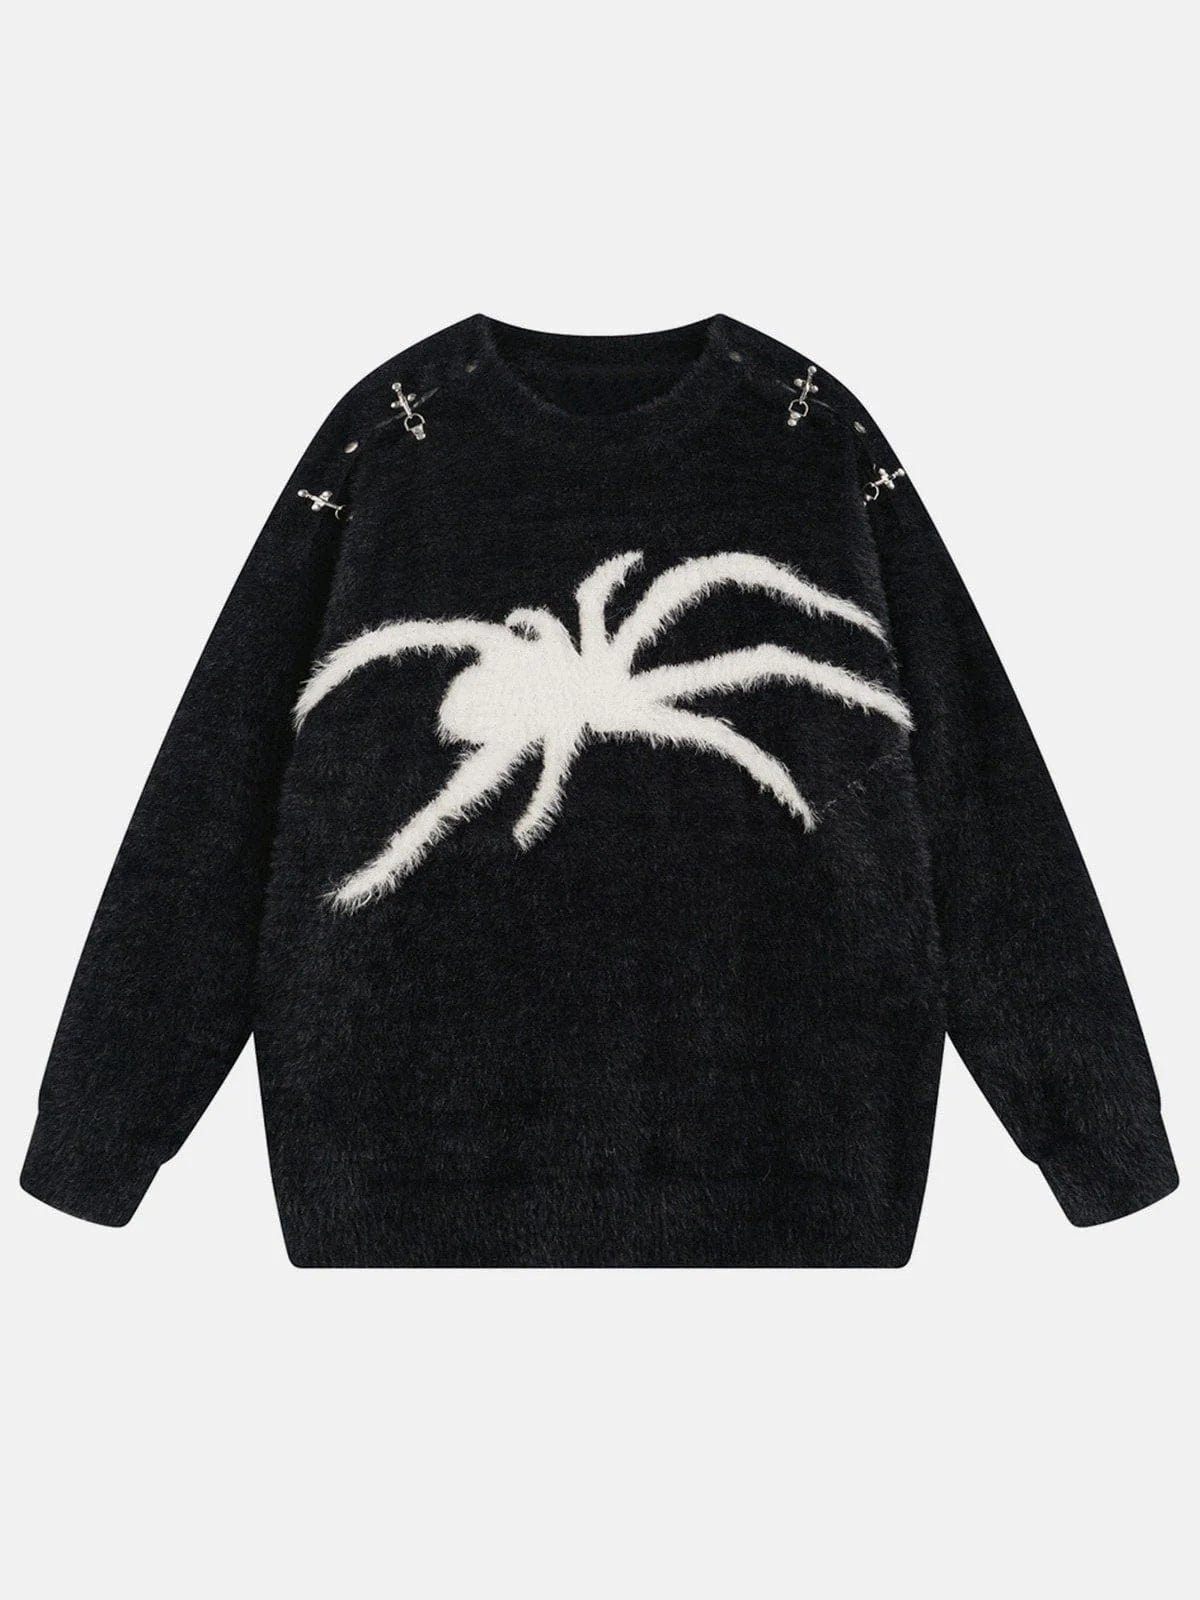 Metal Buckle Spider Jacquard Sweater